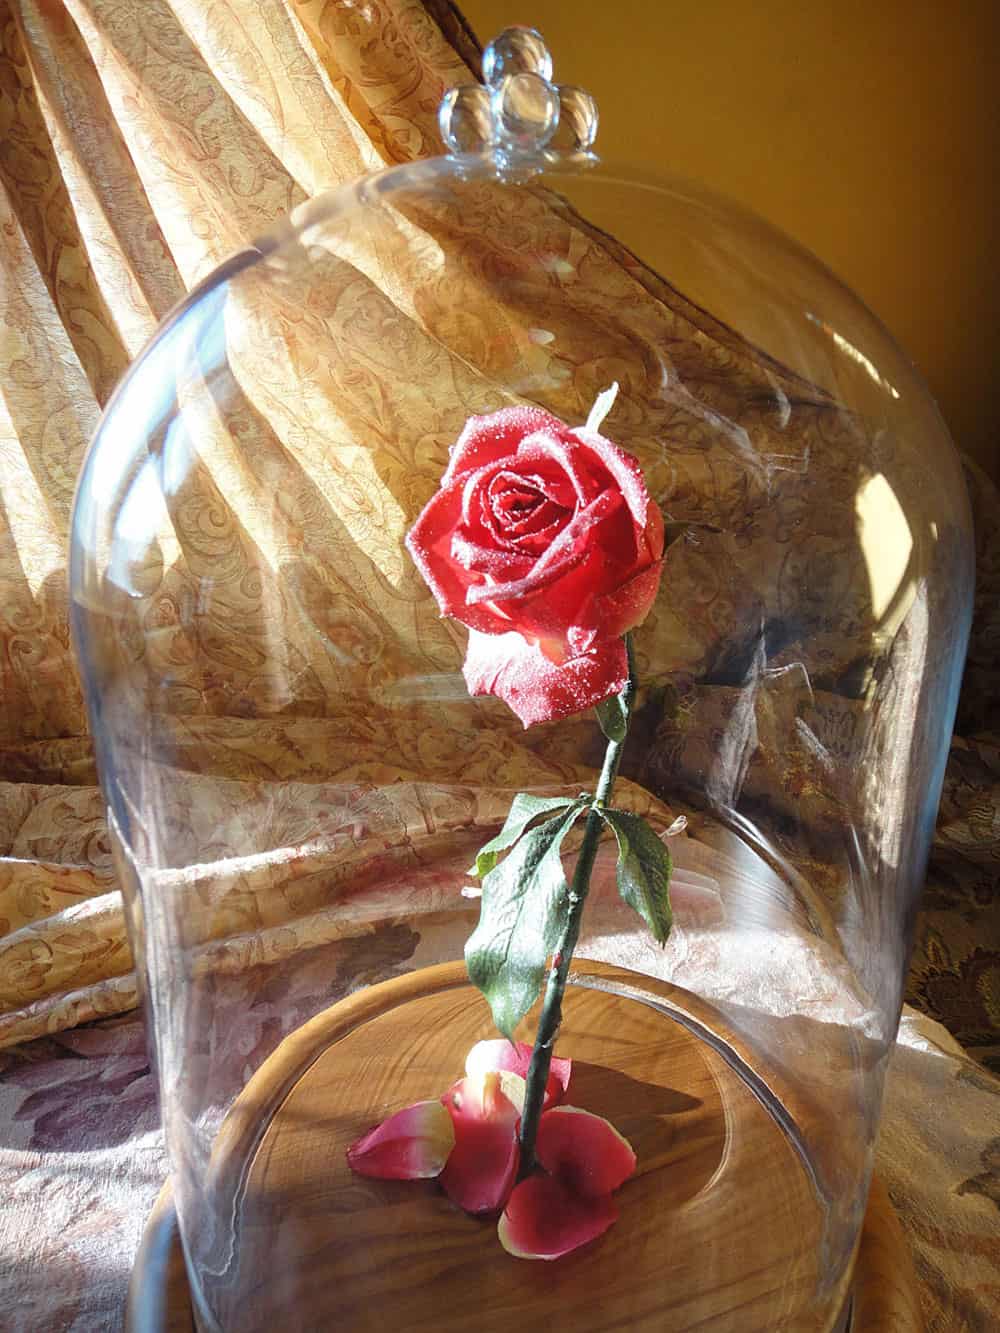 Hands Full of Crafts Beauty and the Beast Inspired Enchanted Rose Romantic Stuff to Buy Her